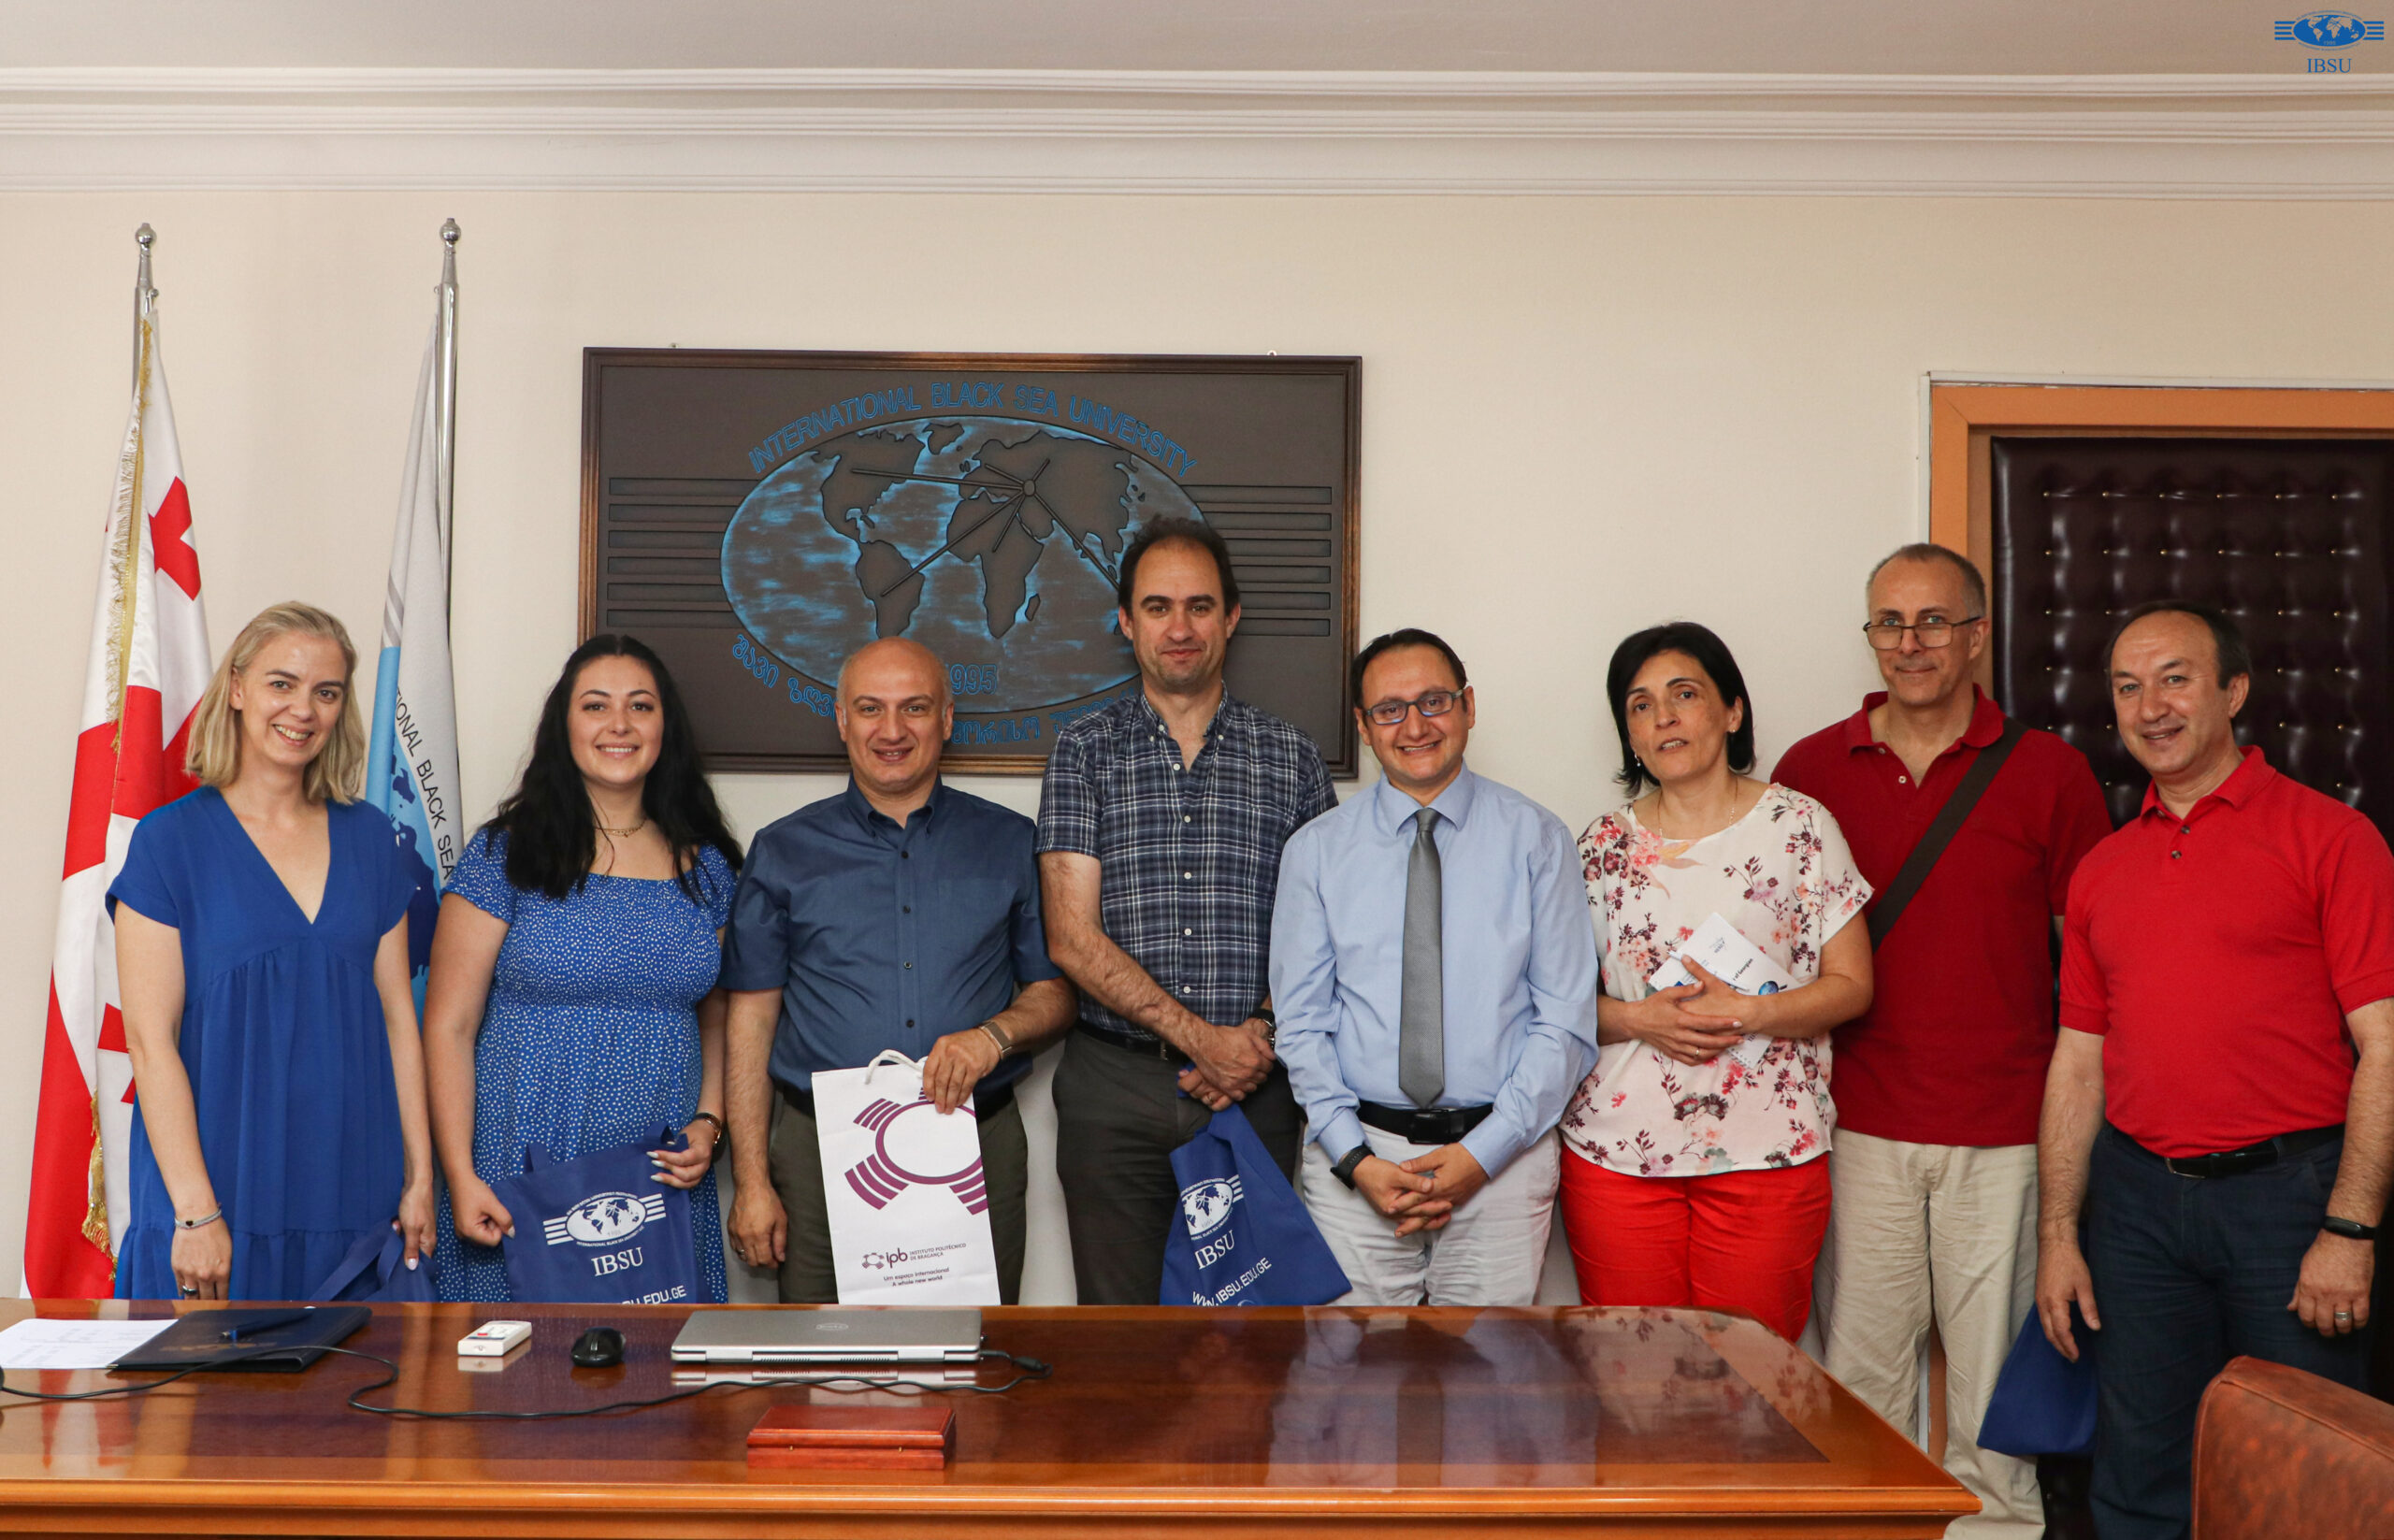 The Department of International Relations of the International Black Sea University hosted a delegation from the  Polytechnic Institute of Bragança, Portugal